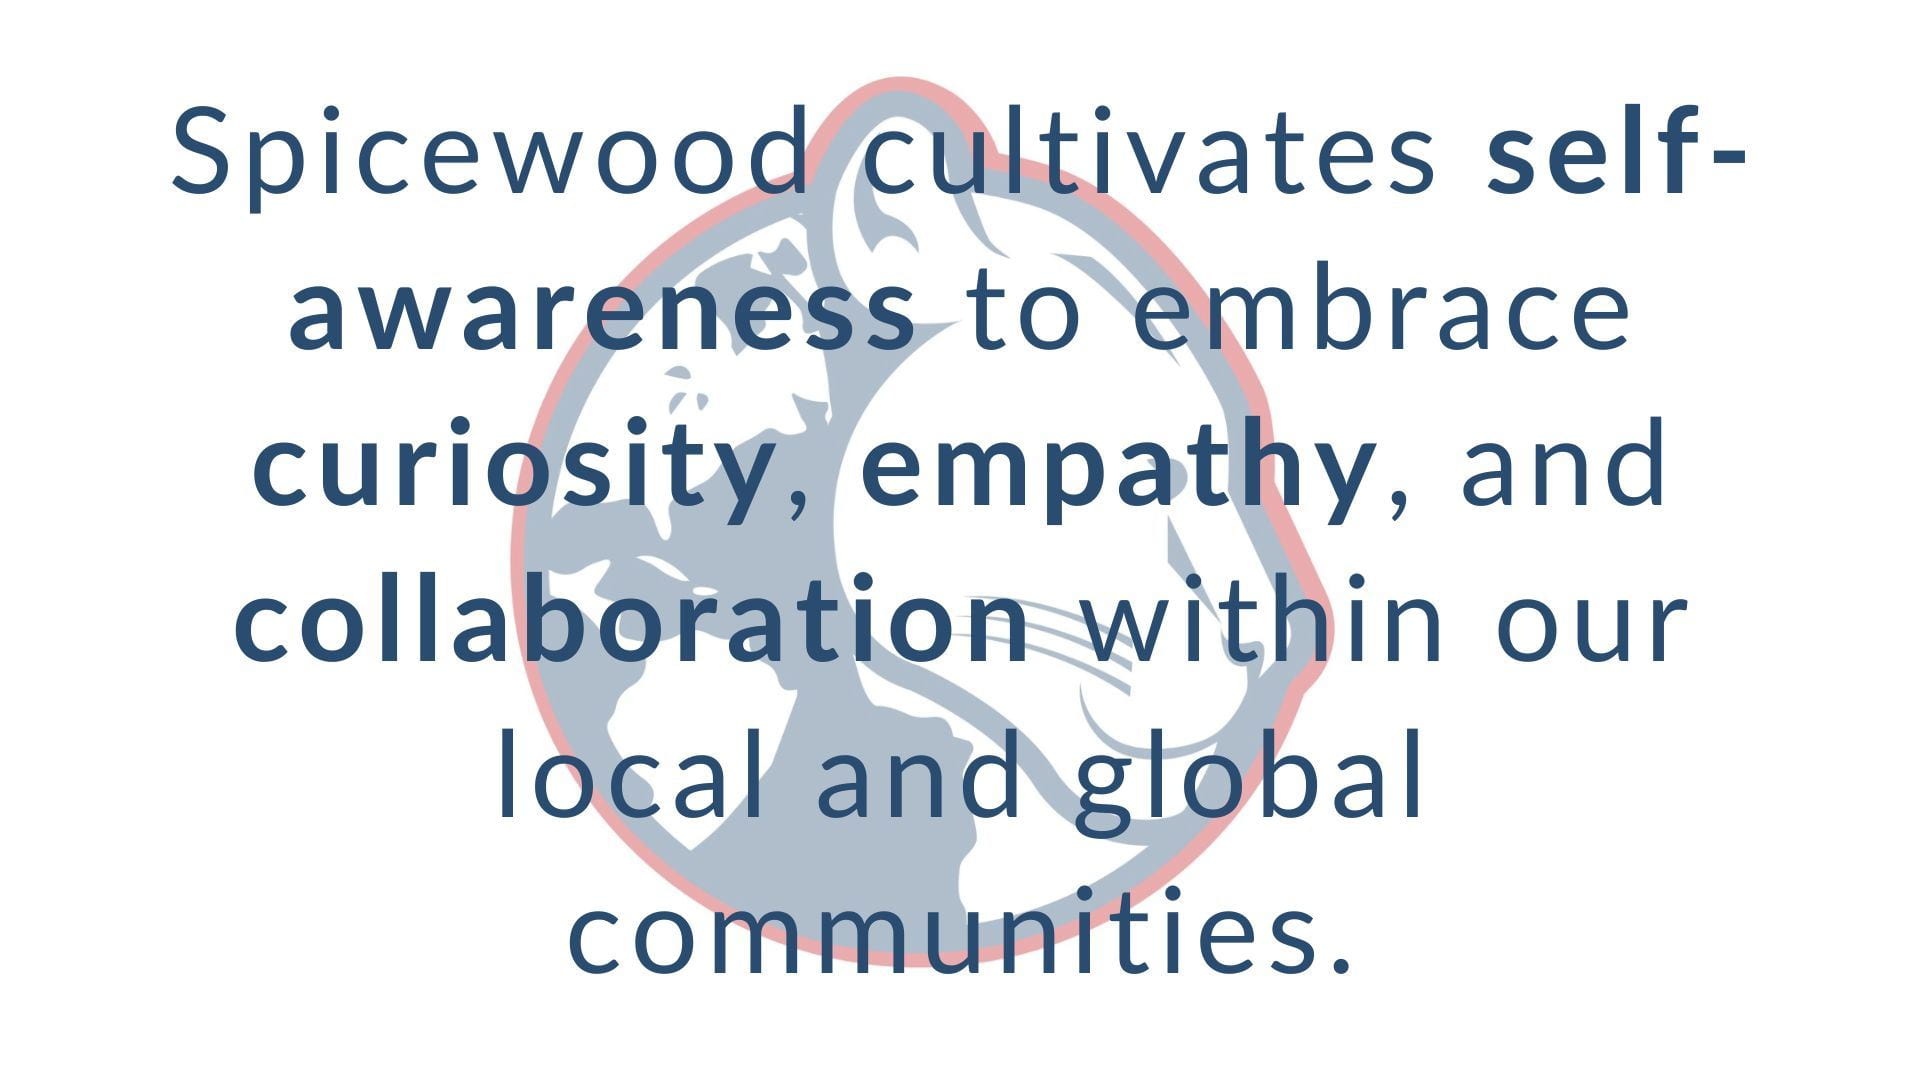 Spicewood cultivates self- awareness to embrace curiosity, empathy, and collaboration within our local and global communities.